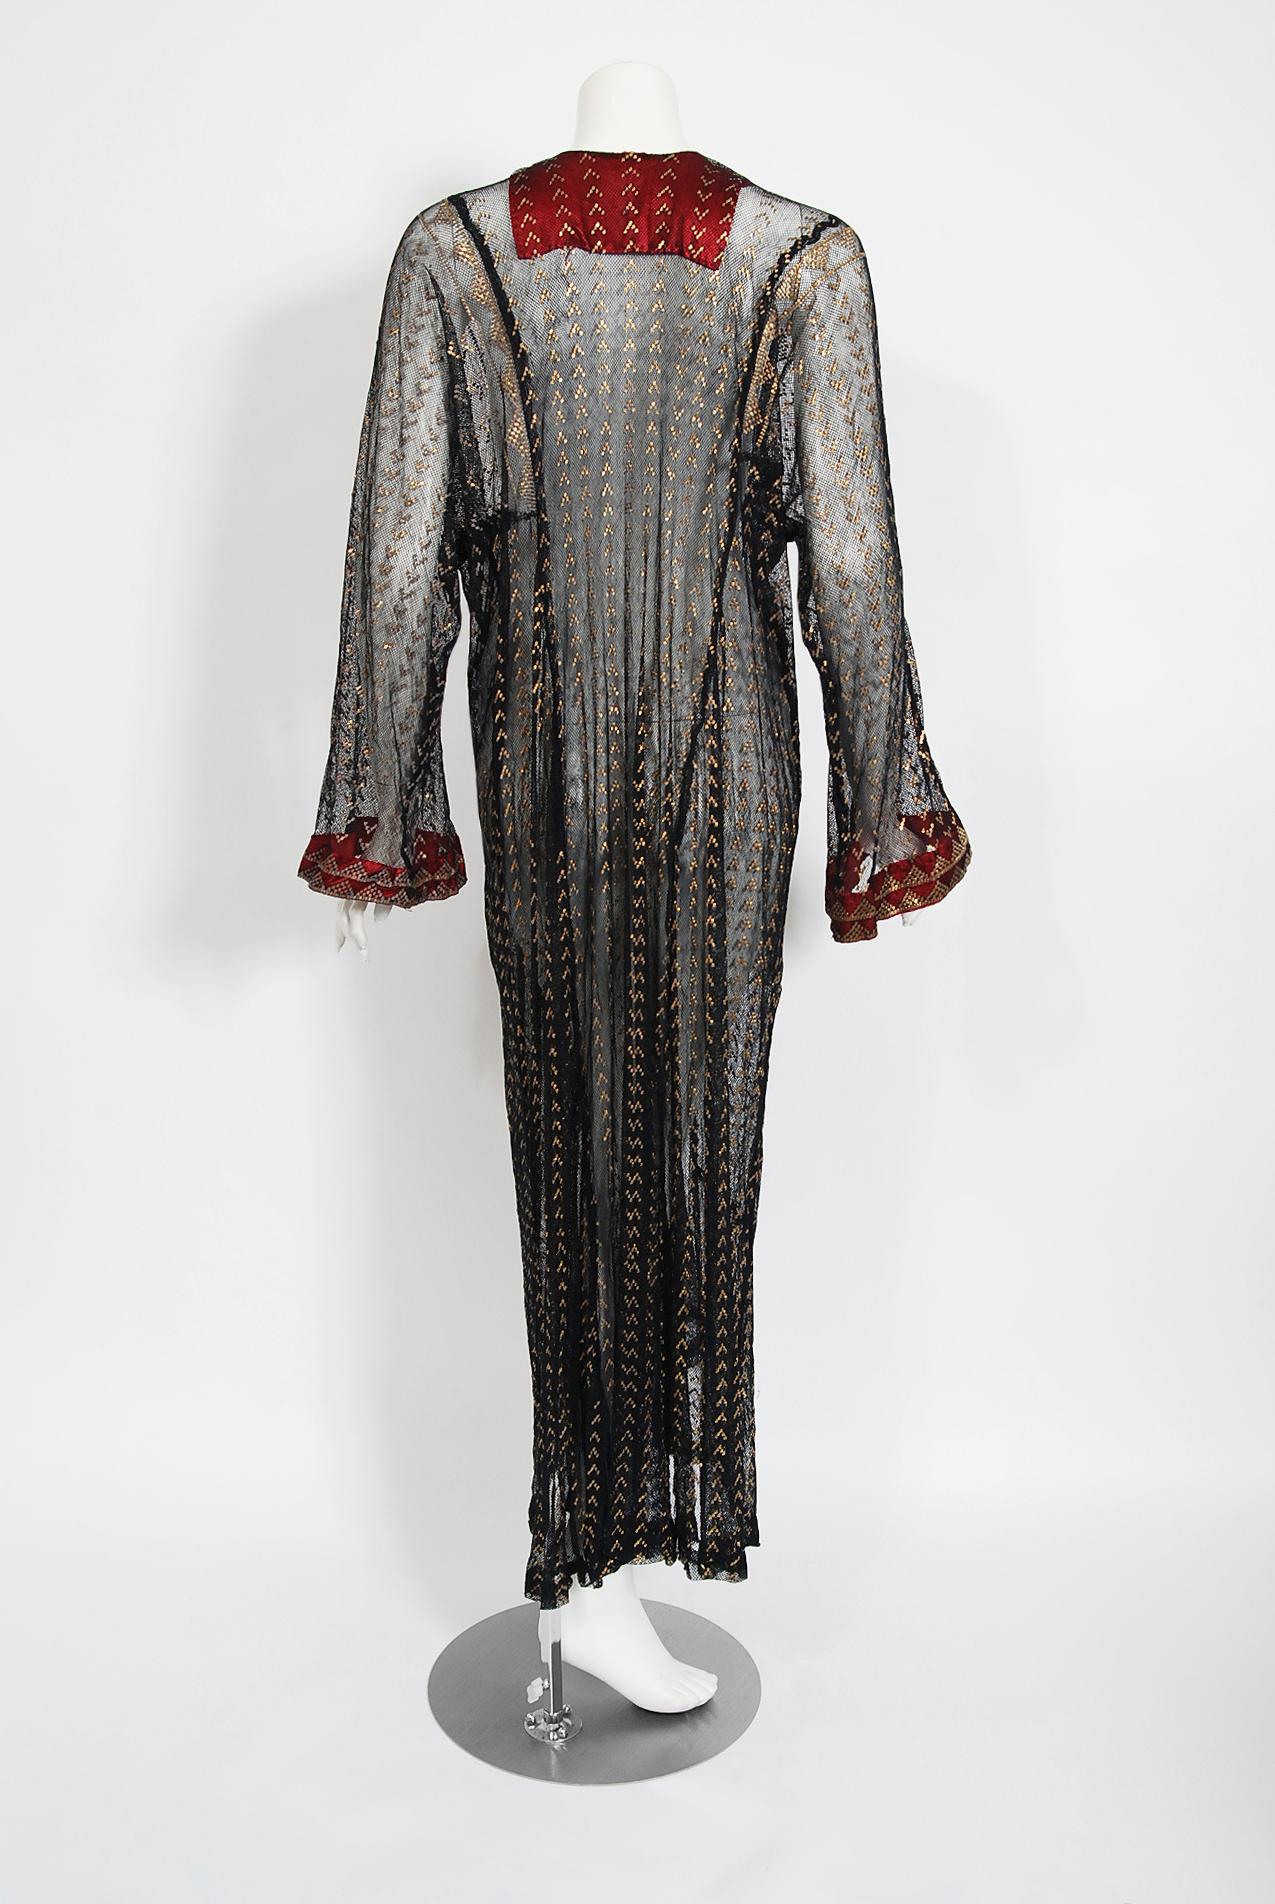 1930's Egyptian Antique Couture Assuit Hammered Metal Deco Sheer-Net Maxi Dress 3